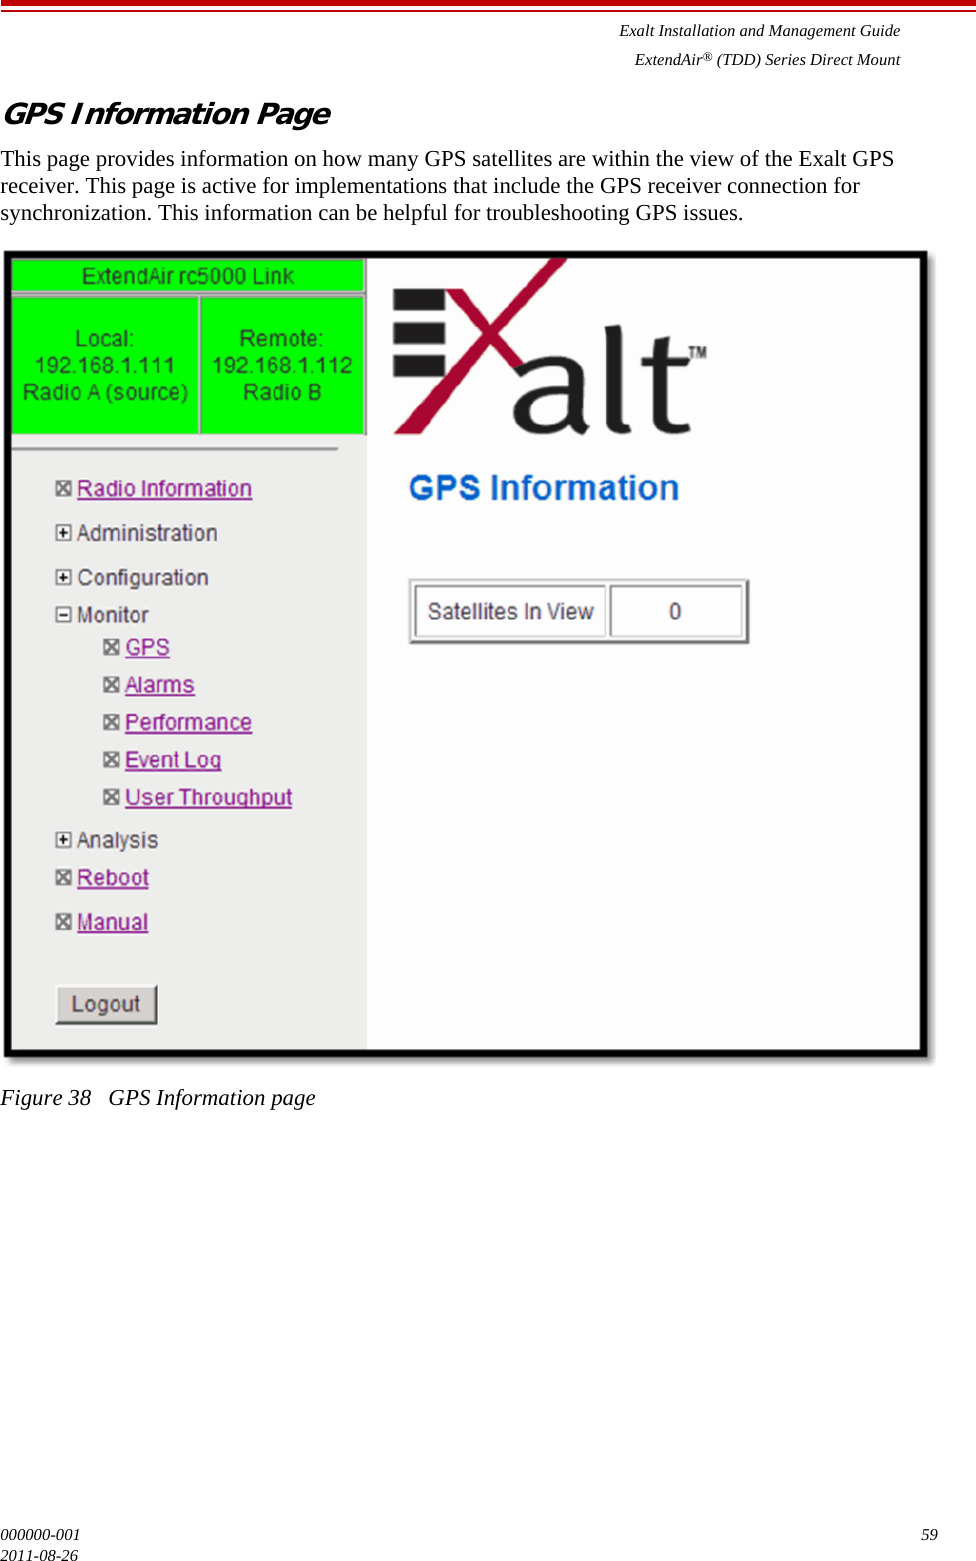 Exalt Installation and Management GuideExtendAir® (TDD) Series Direct Mount000000-001 592011-08-26GPS Information PageThis page provides information on how many GPS satellites are within the view of the Exalt GPS receiver. This page is active for implementations that include the GPS receiver connection for synchronization. This information can be helpful for troubleshooting GPS issues.Figure 38   GPS Information page